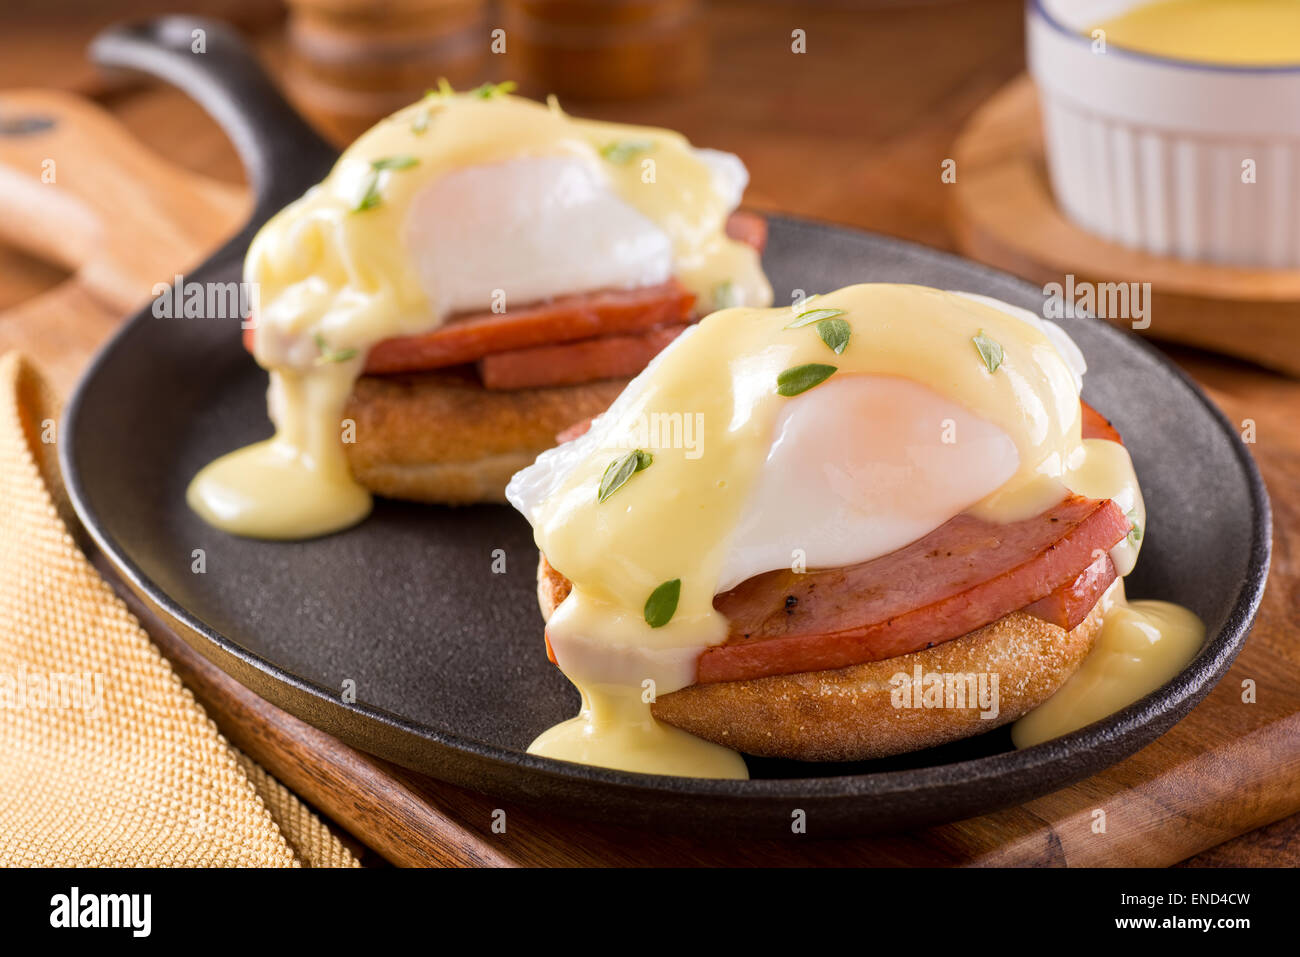 A delicious eggs benedict with thick cut ham, hollandaise sauce, and thyme garnish. Stock Photo